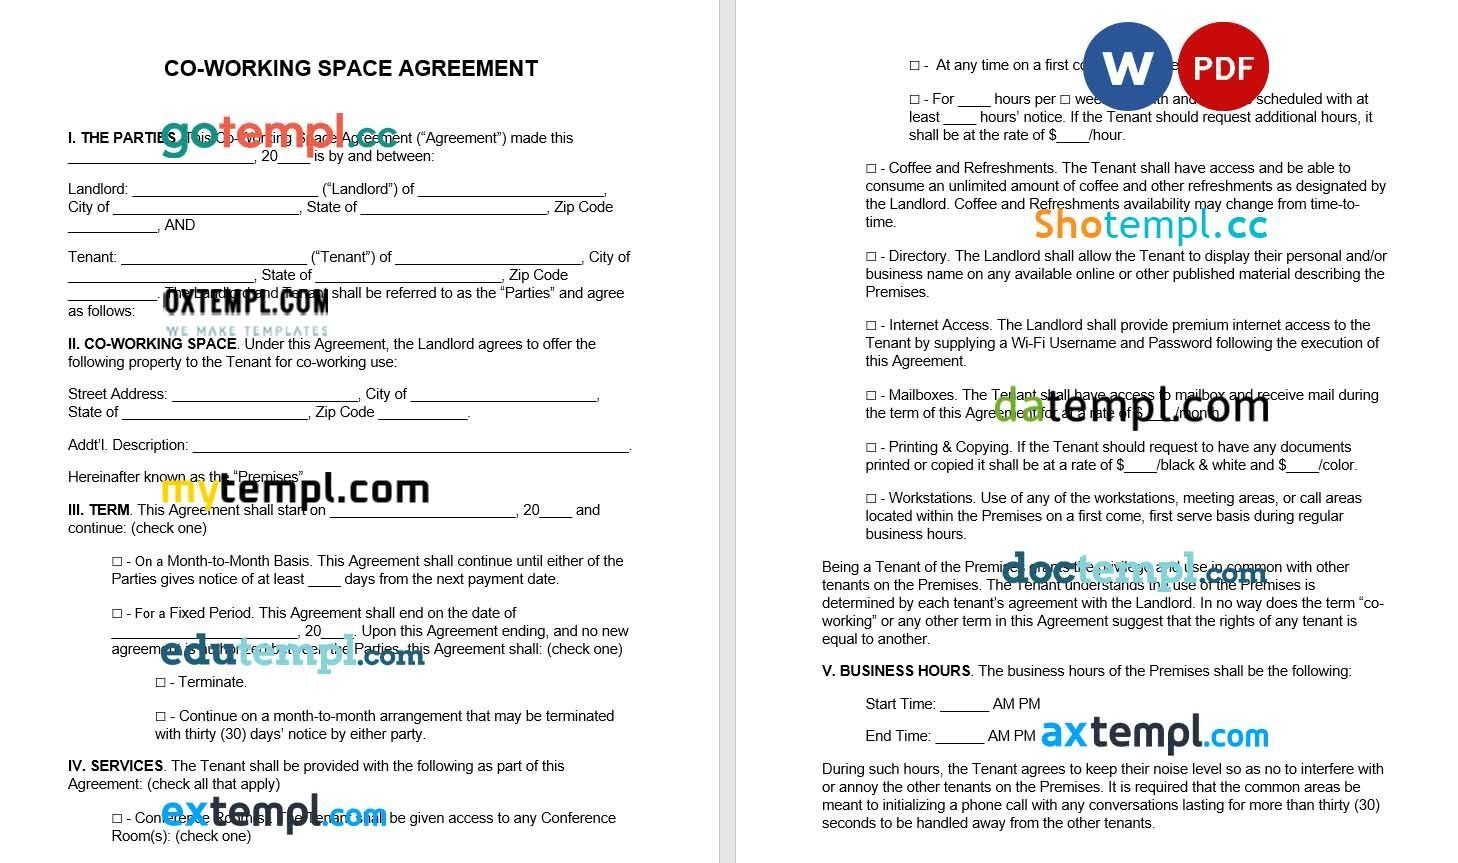 Bicycle Bill of sale Agreement Form Word example, fully editable